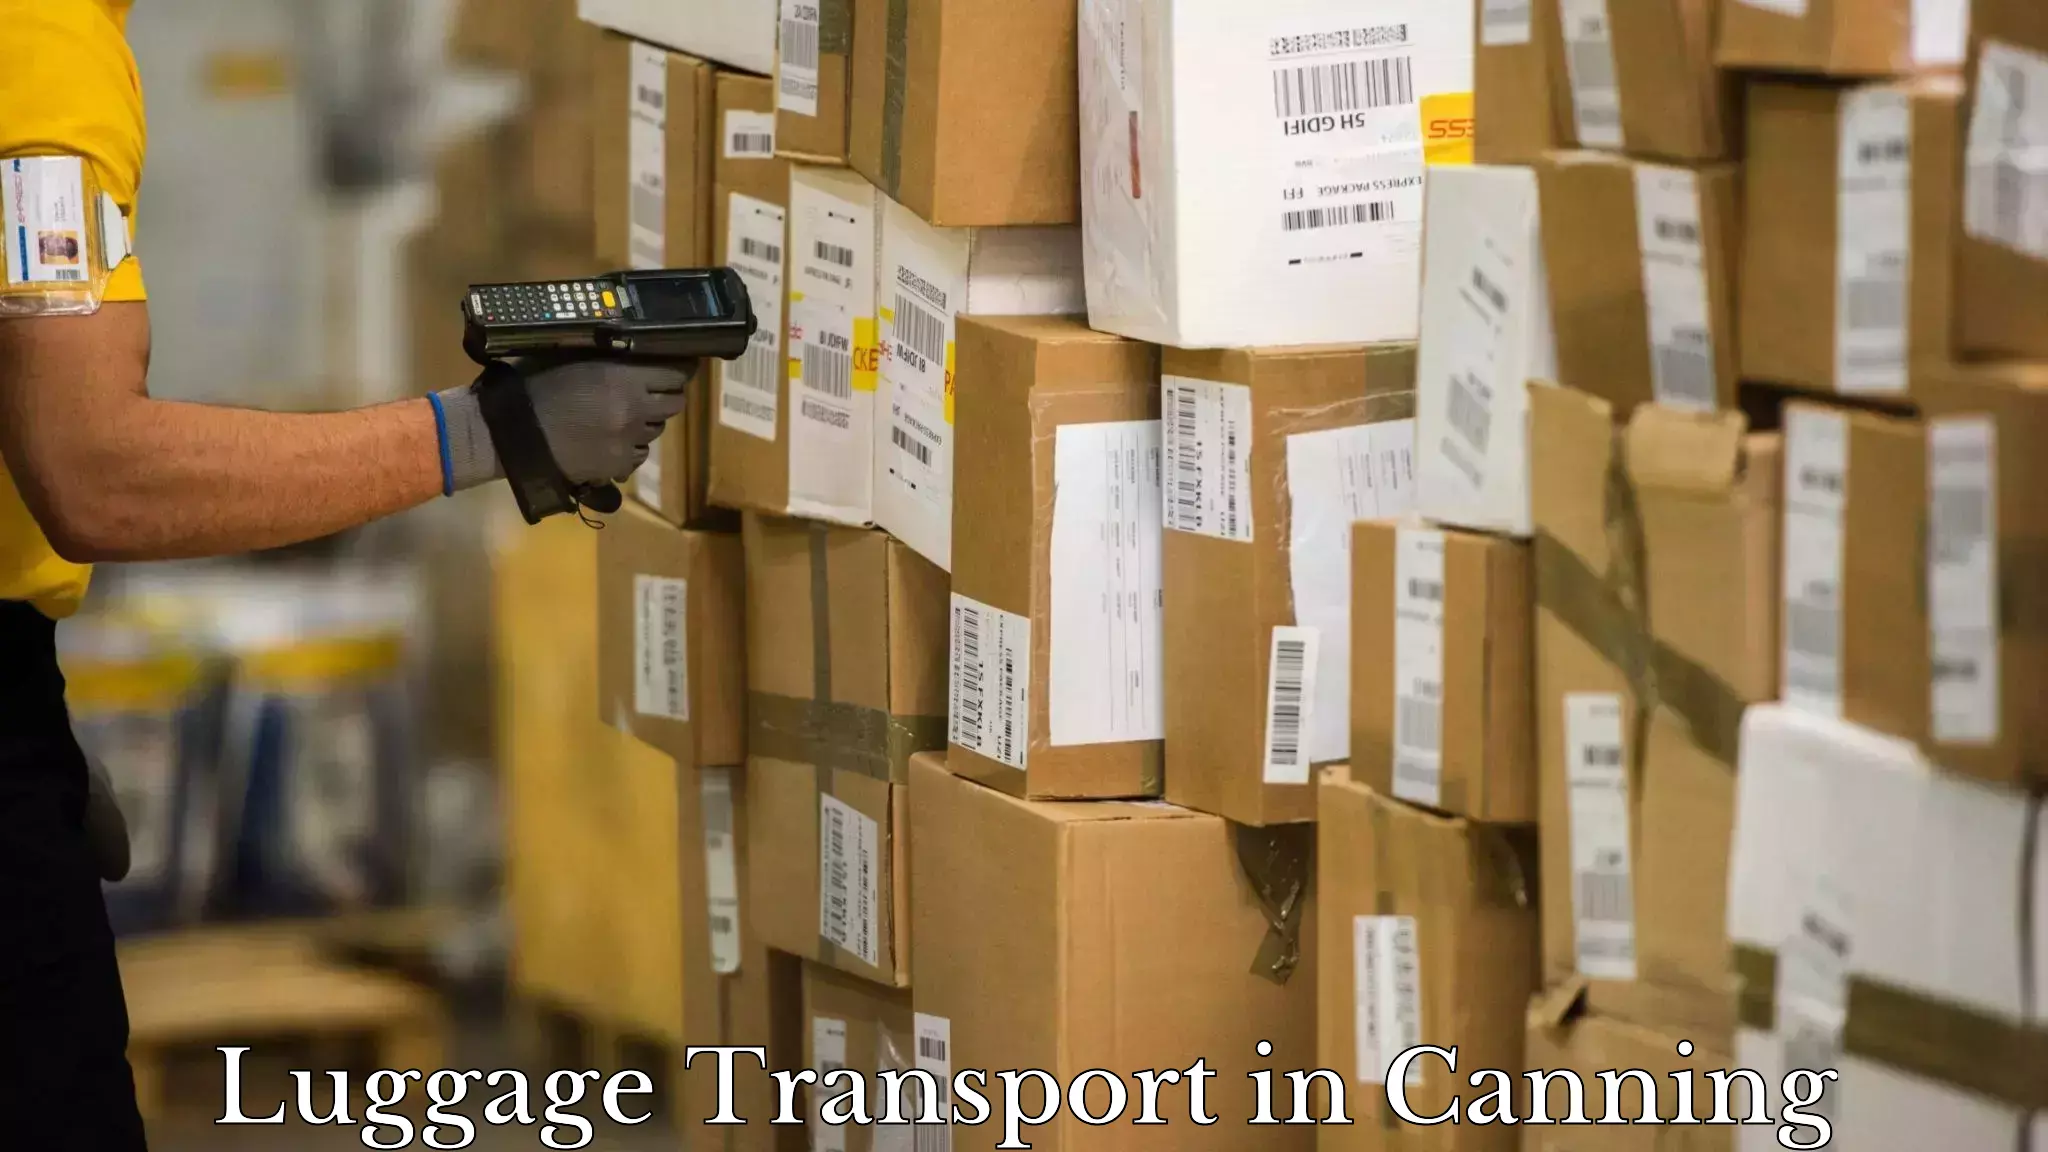 Baggage transport management in Canning